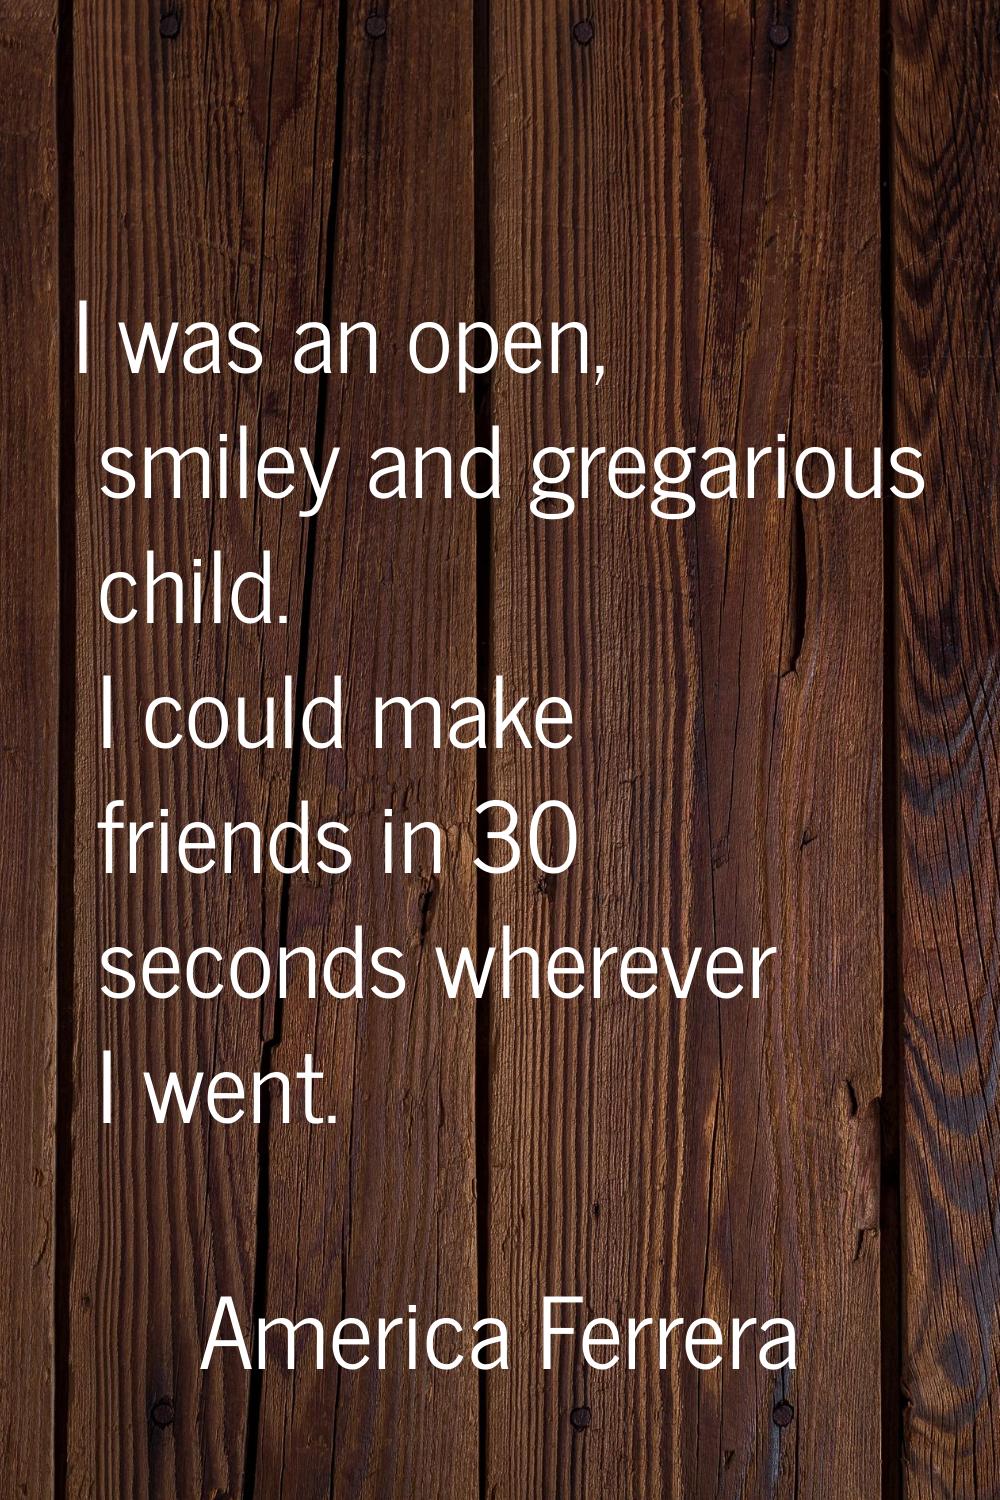 I was an open, smiley and gregarious child. I could make friends in 30 seconds wherever I went.